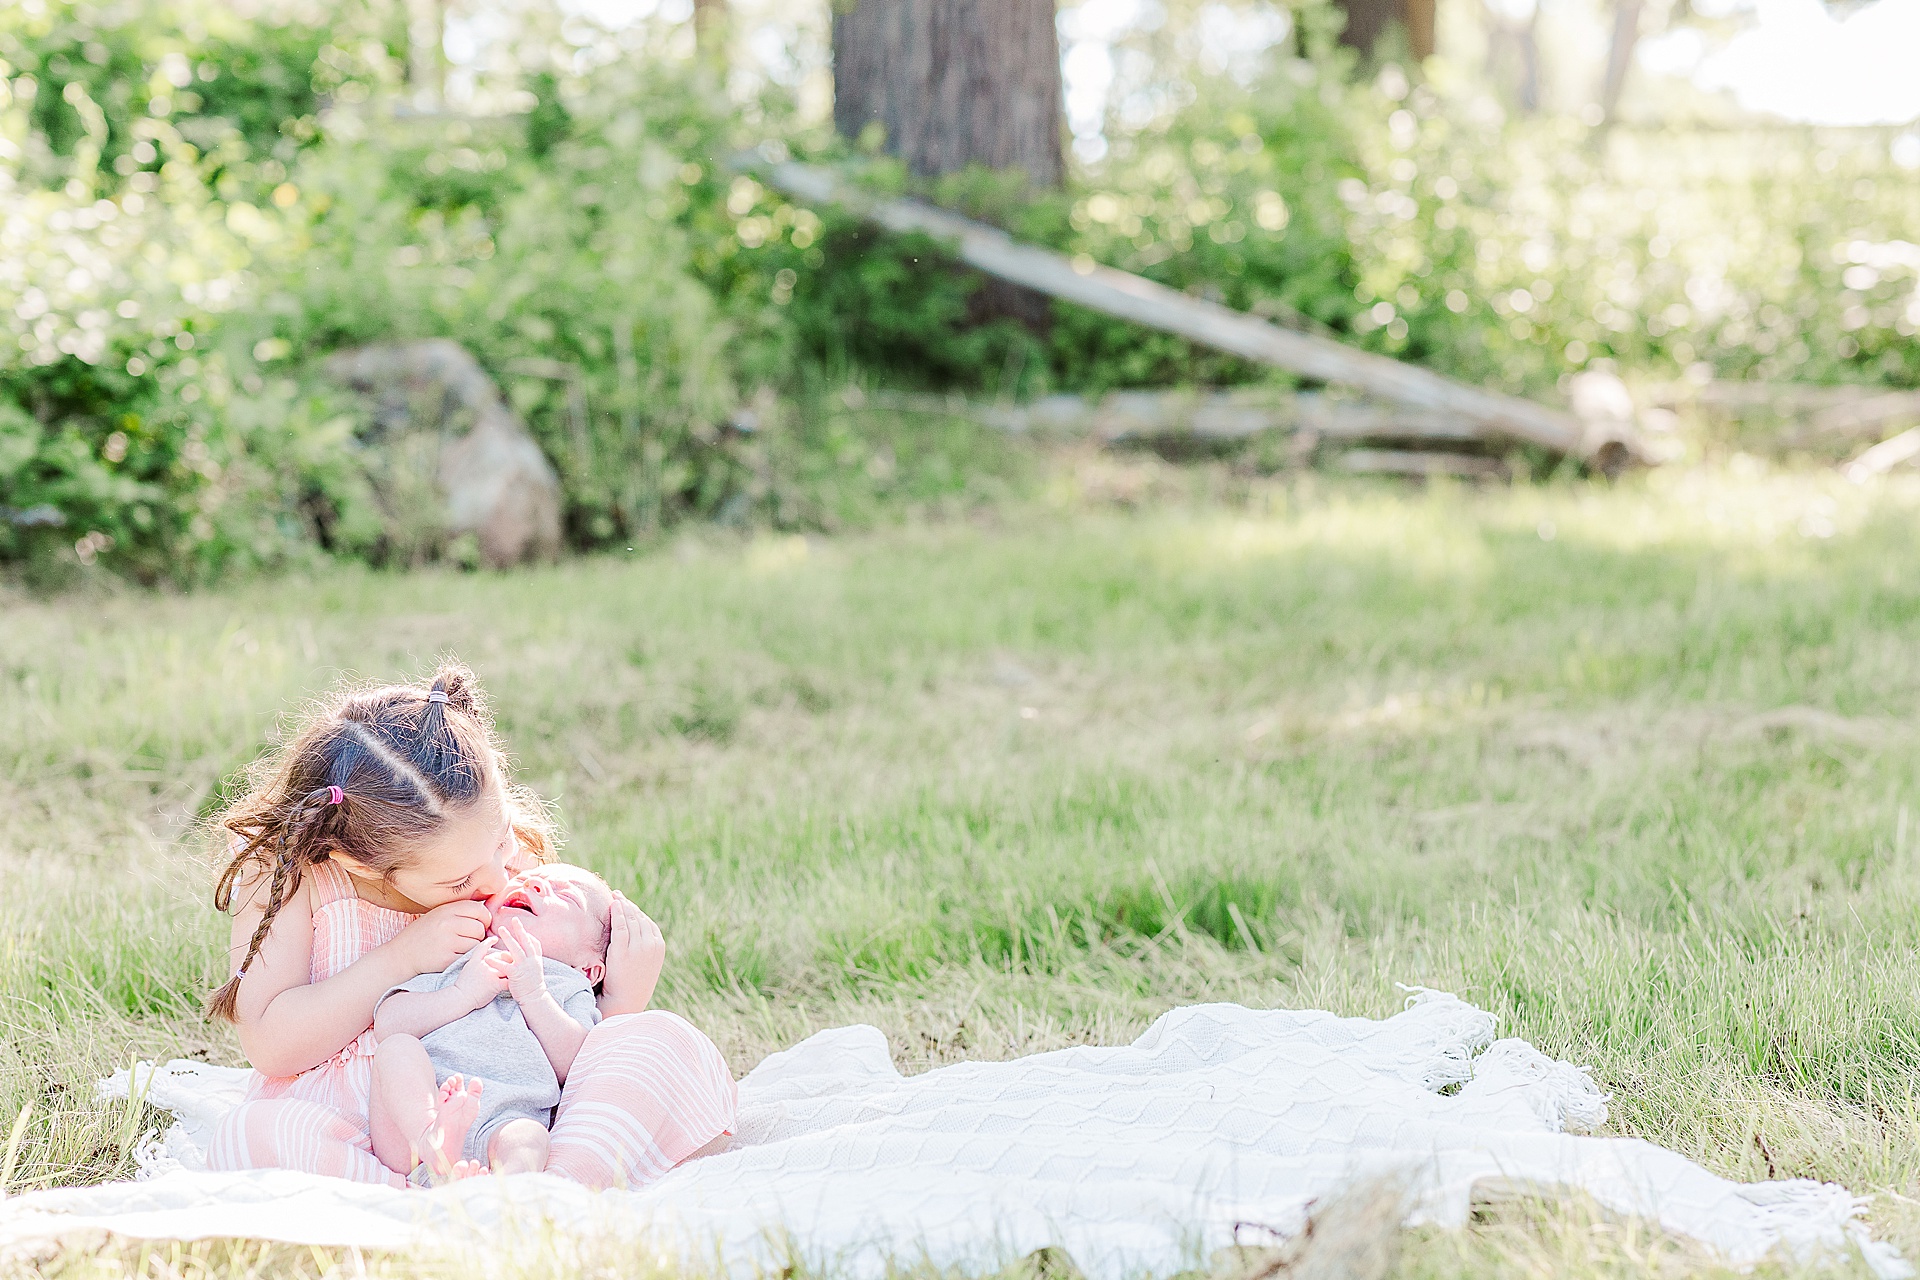 Where Should I Take My Newborn Photos? | Outdoor Newborn Photo Session at Barber Reservation, Sherborn Massachusetts with Sara Sniderman Photography